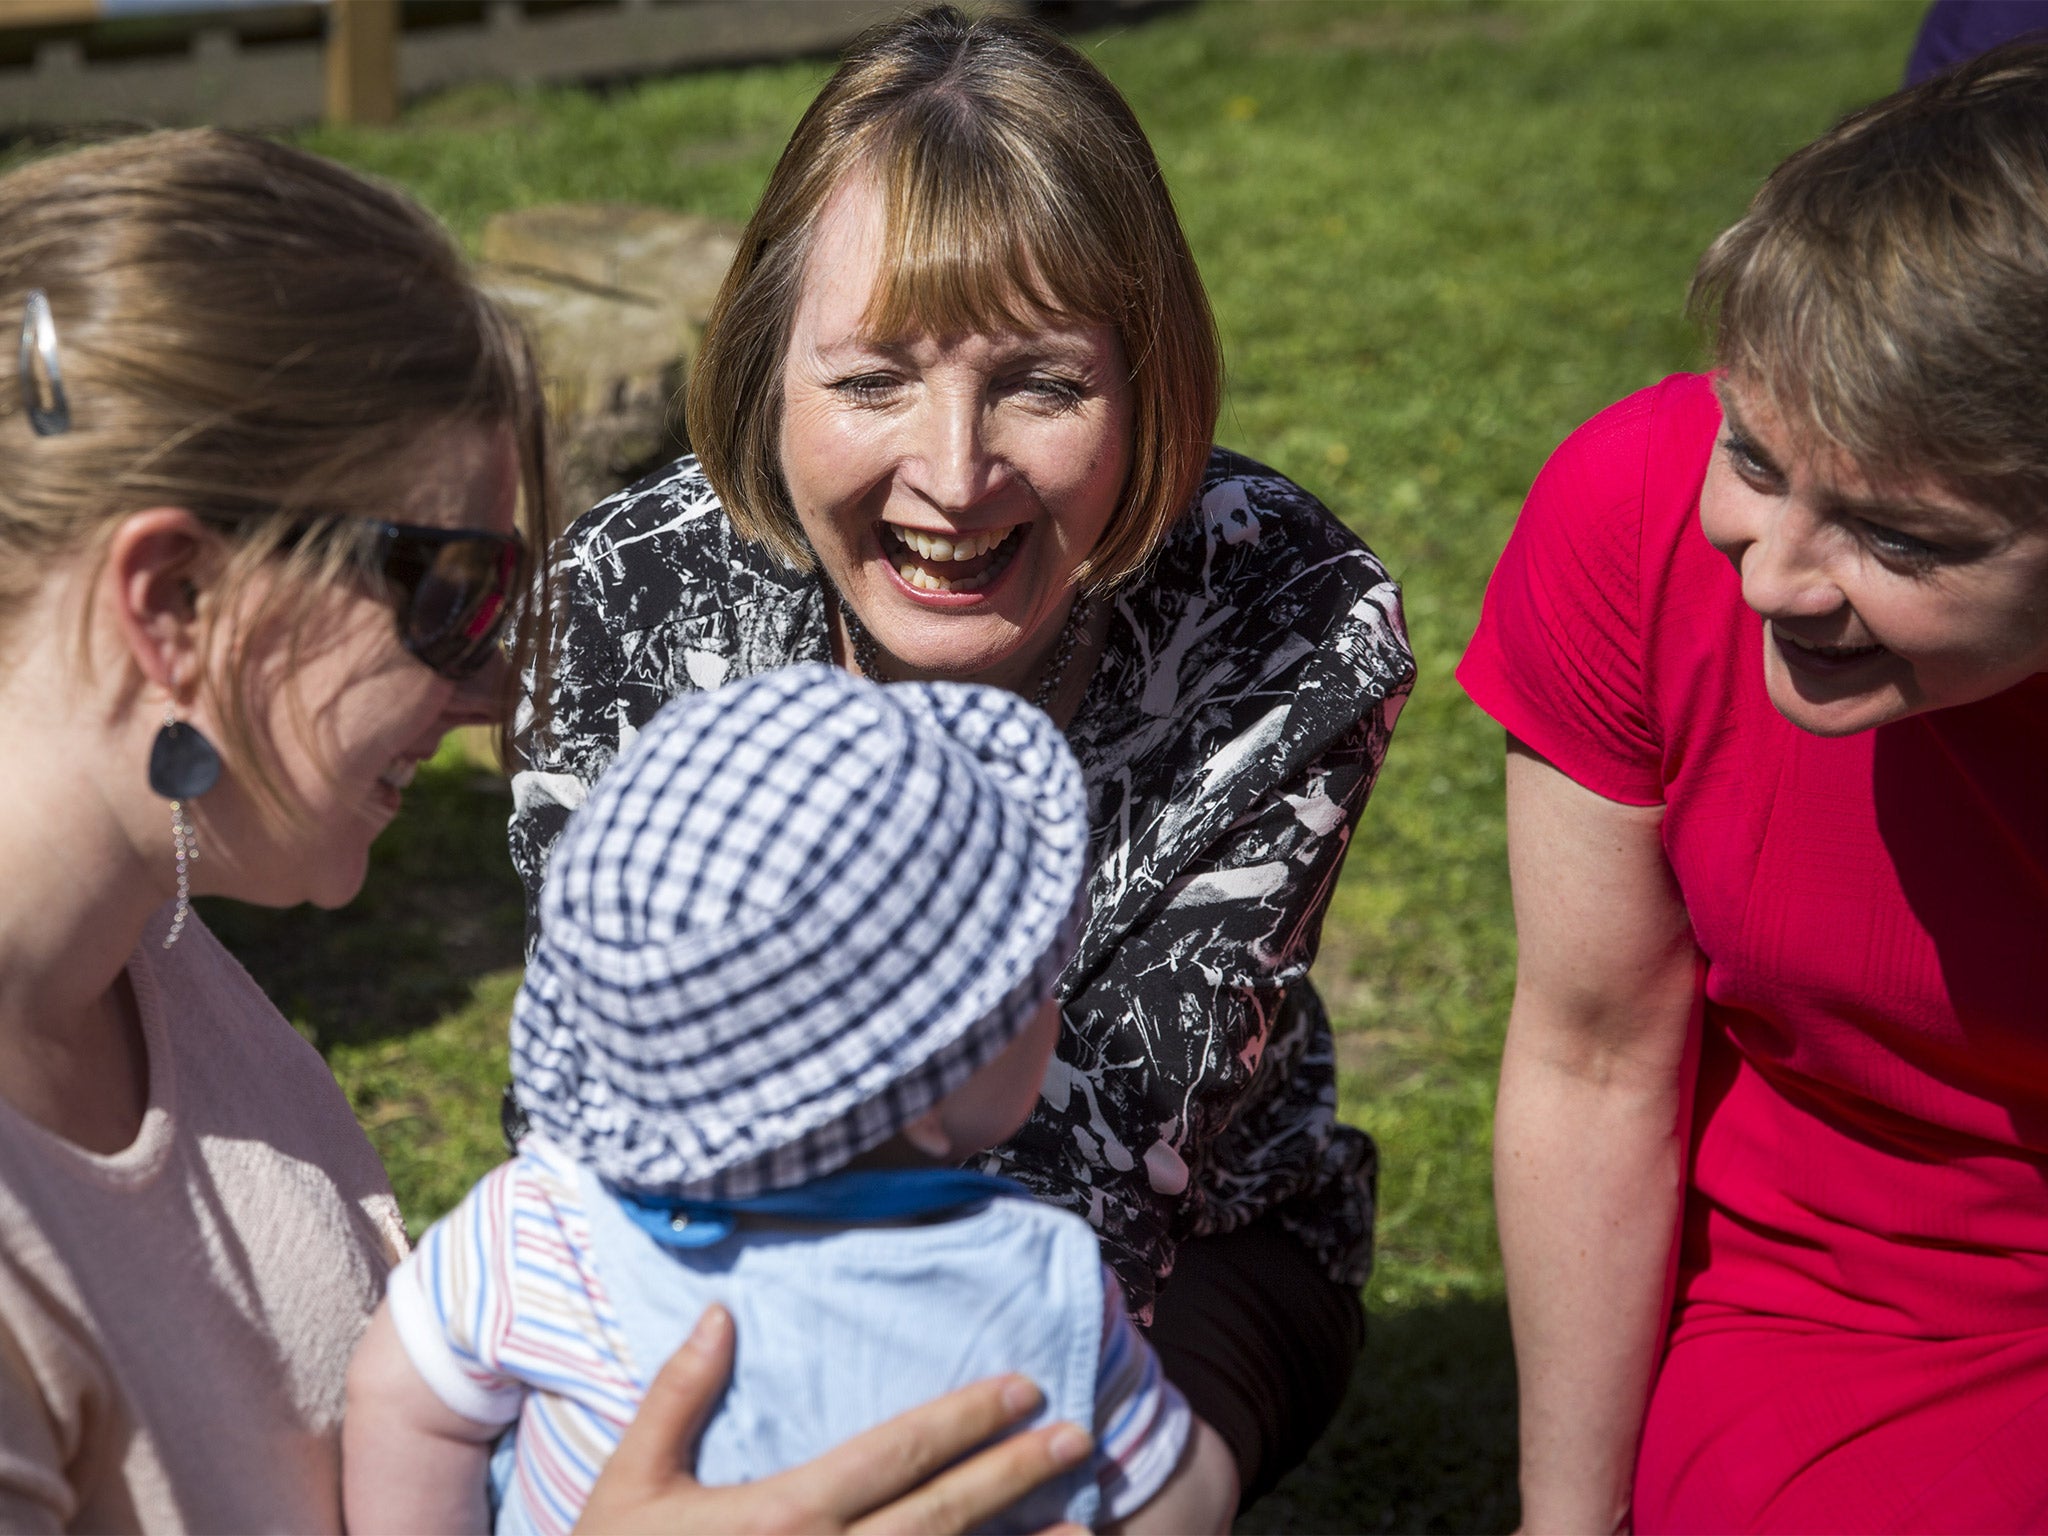 Harriet Harman and Yvette Cooper spoke to parents - and babies - at Stockwell Gardens Nursery, where they launched Labour’s Women’s Manifesto